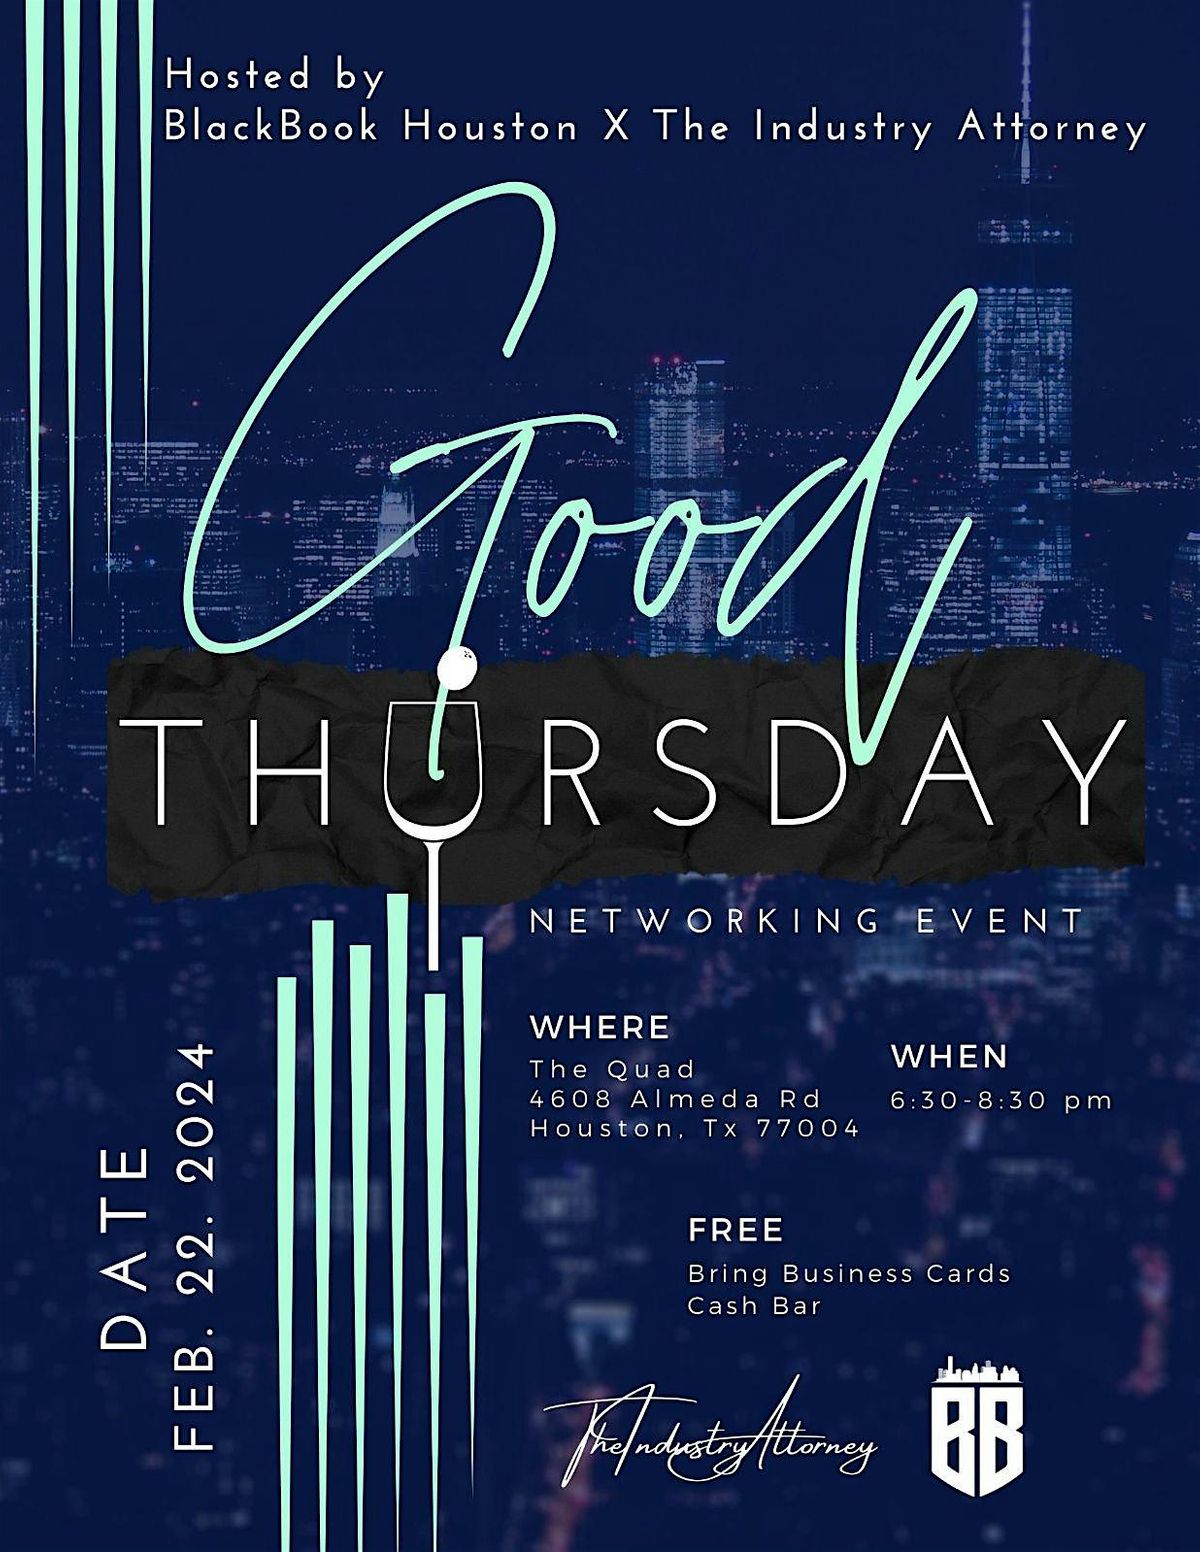 Good Thursday Networking Event